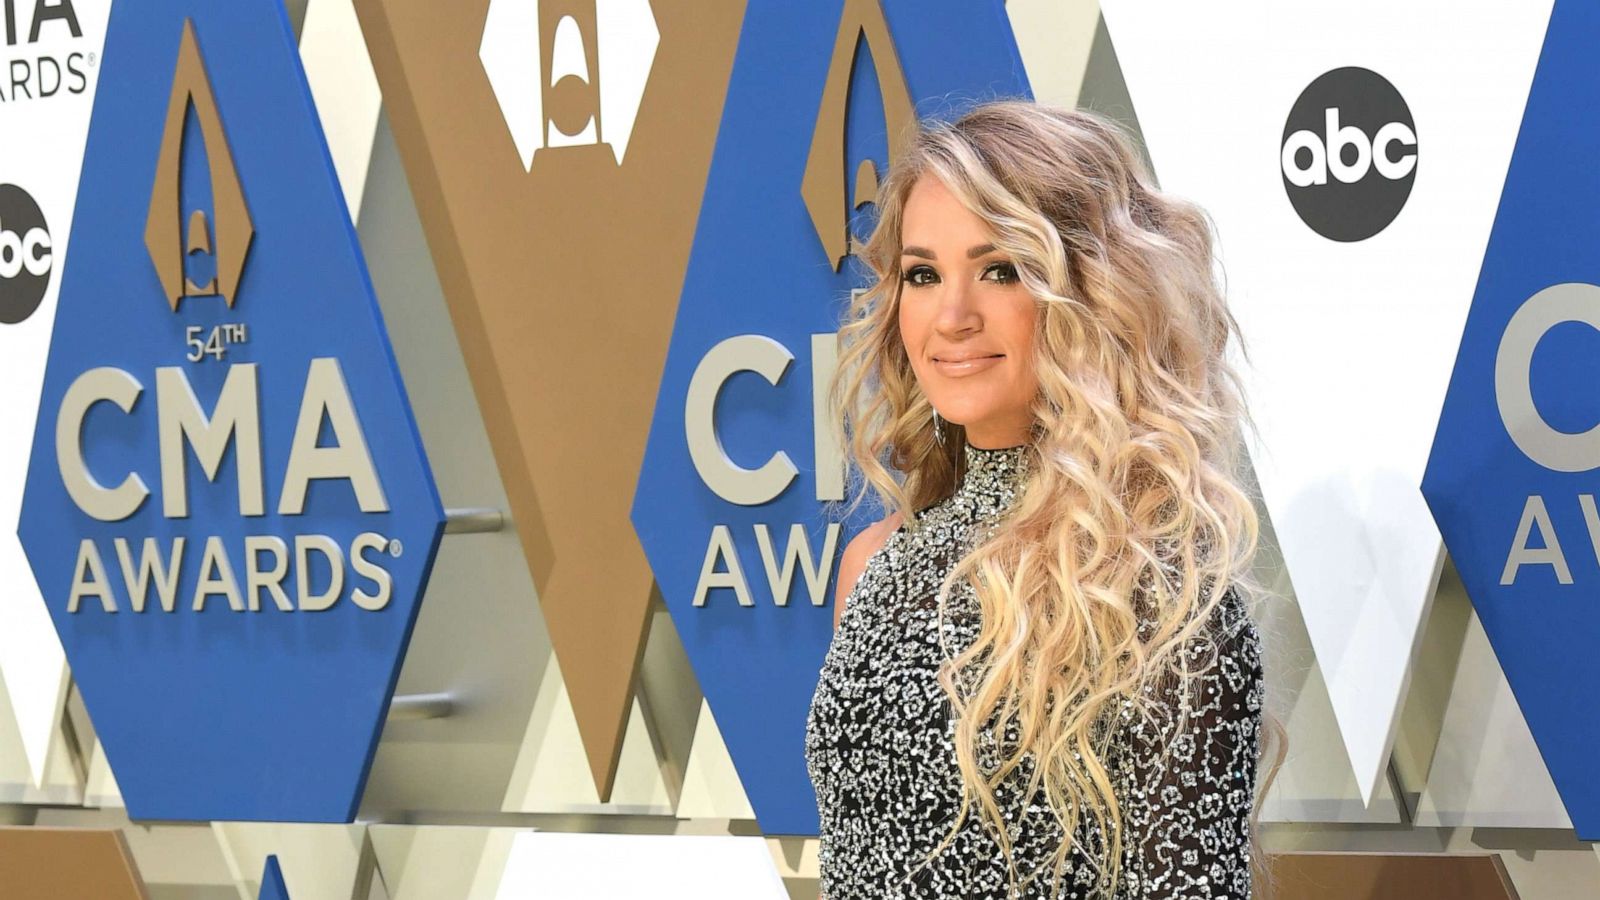 Carrie Underwood Brings Husband Mike Fisher To CMA Awards 2021